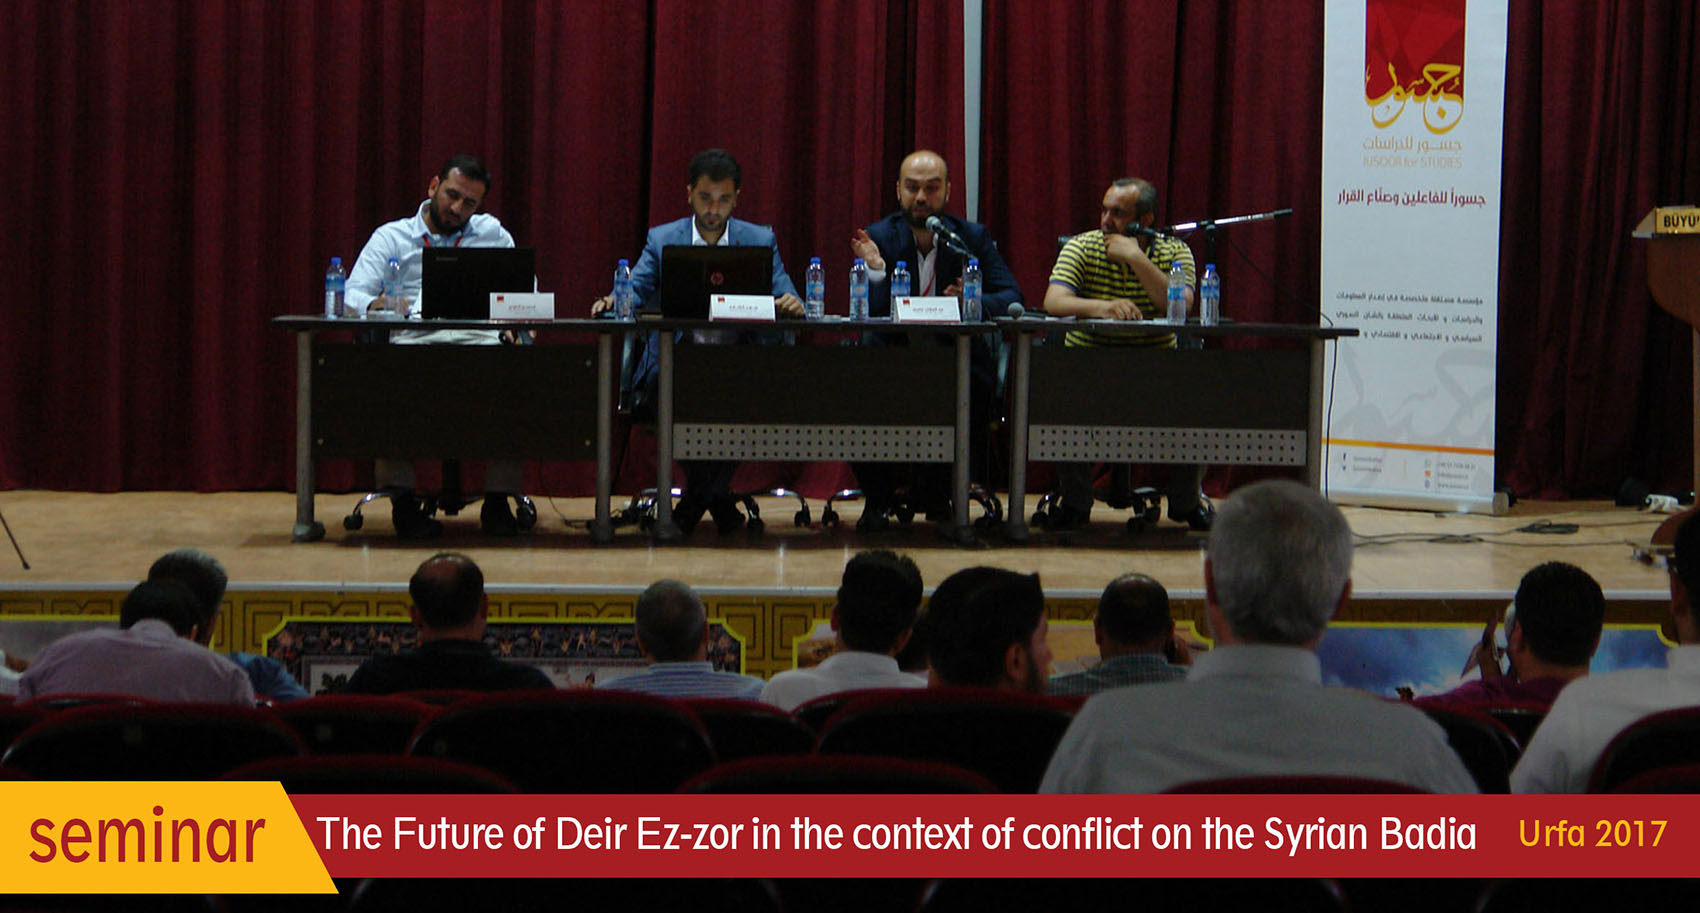 The Future of Deir Ez-zor in the context of conflict on the Syrian Badia